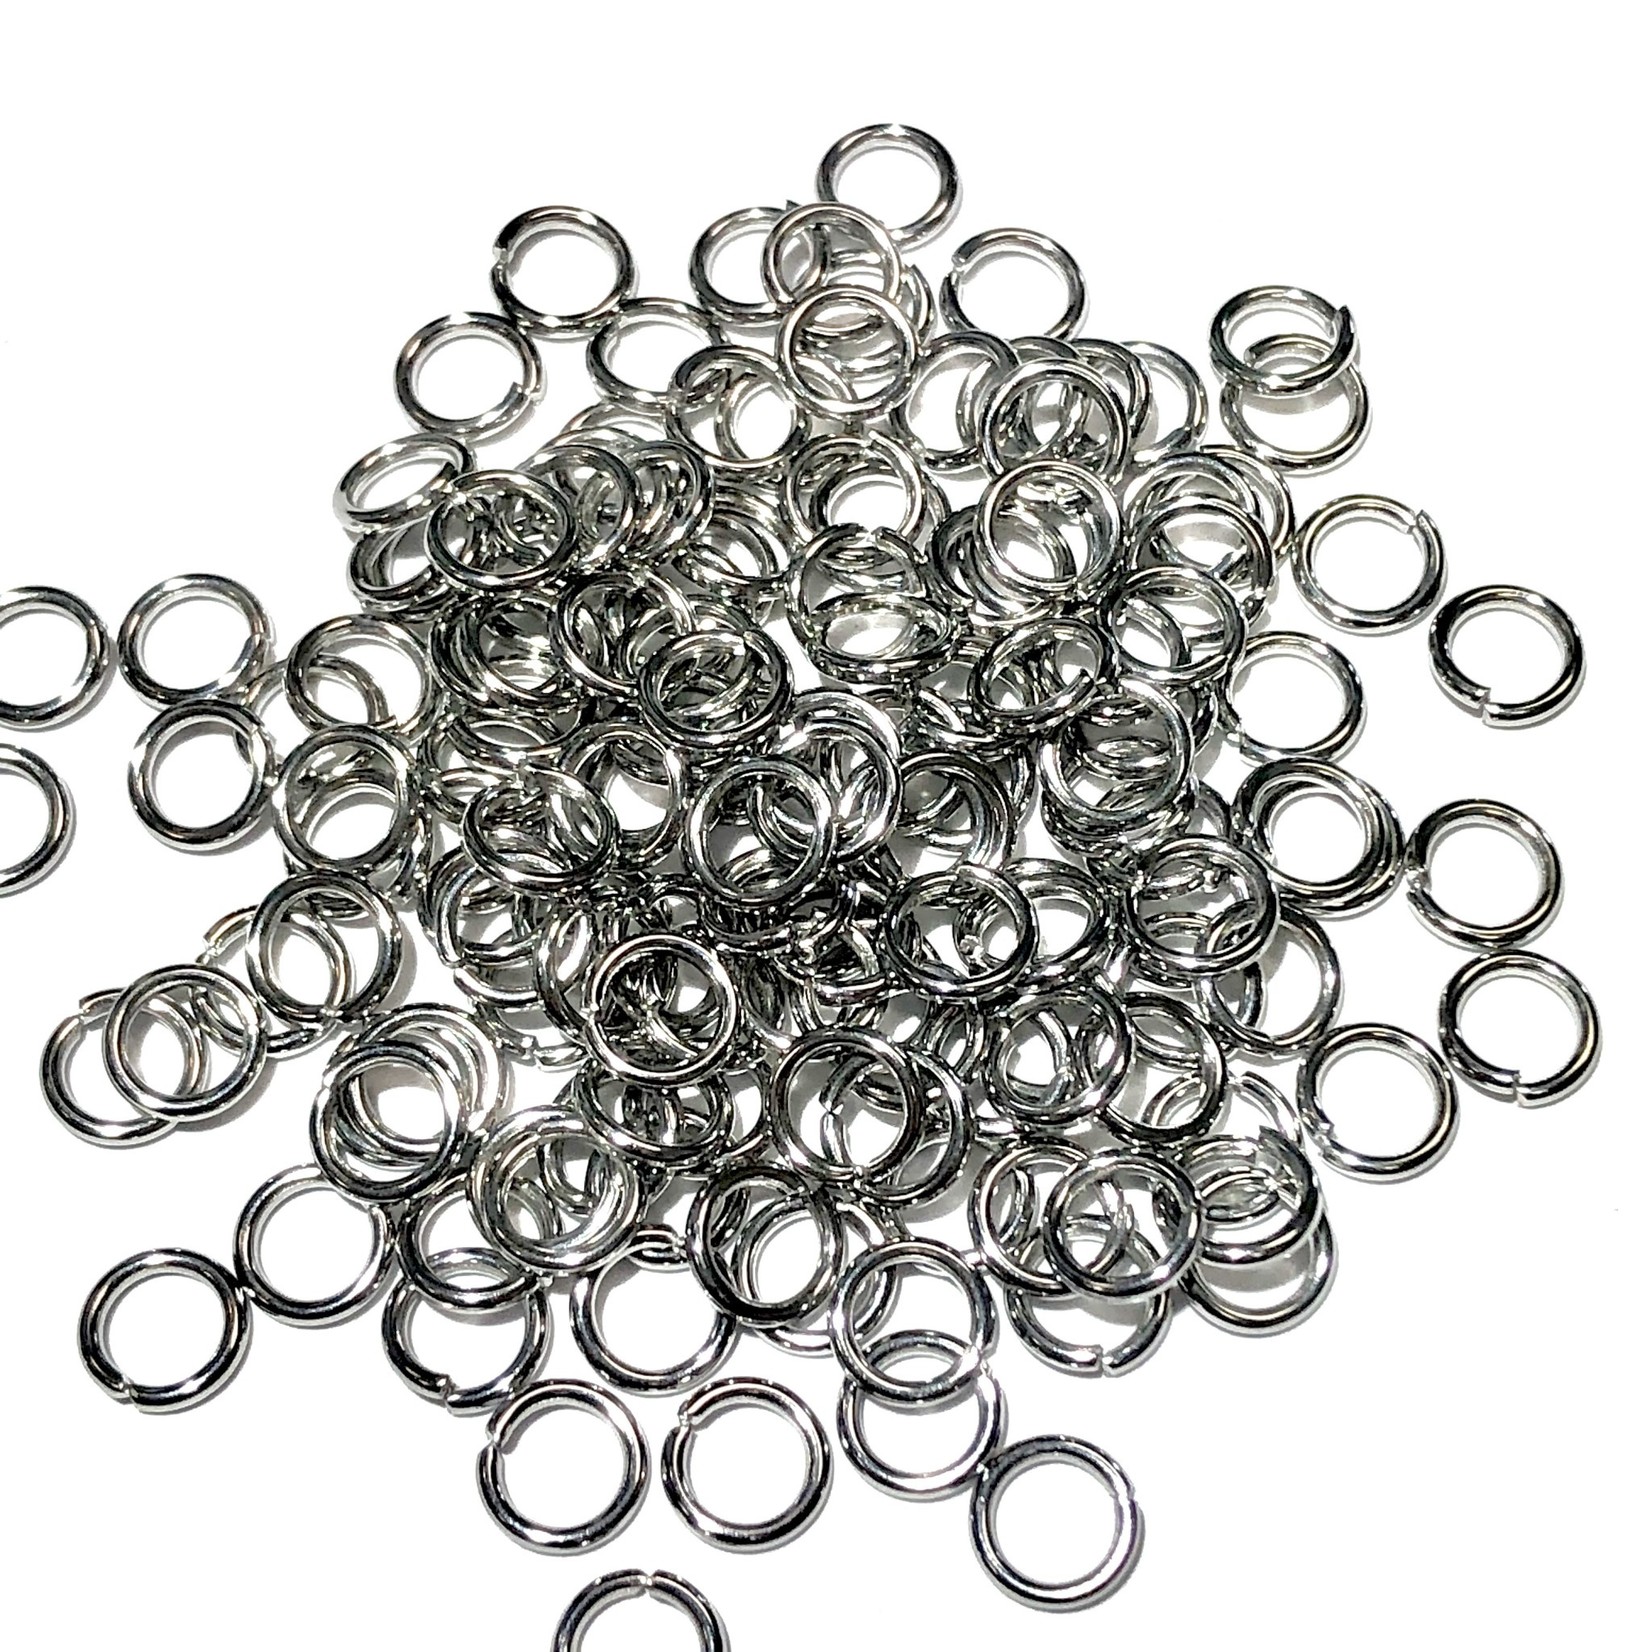 Stainless Steel 18Ga SWG Jump Rings 6x1mm 100pcs